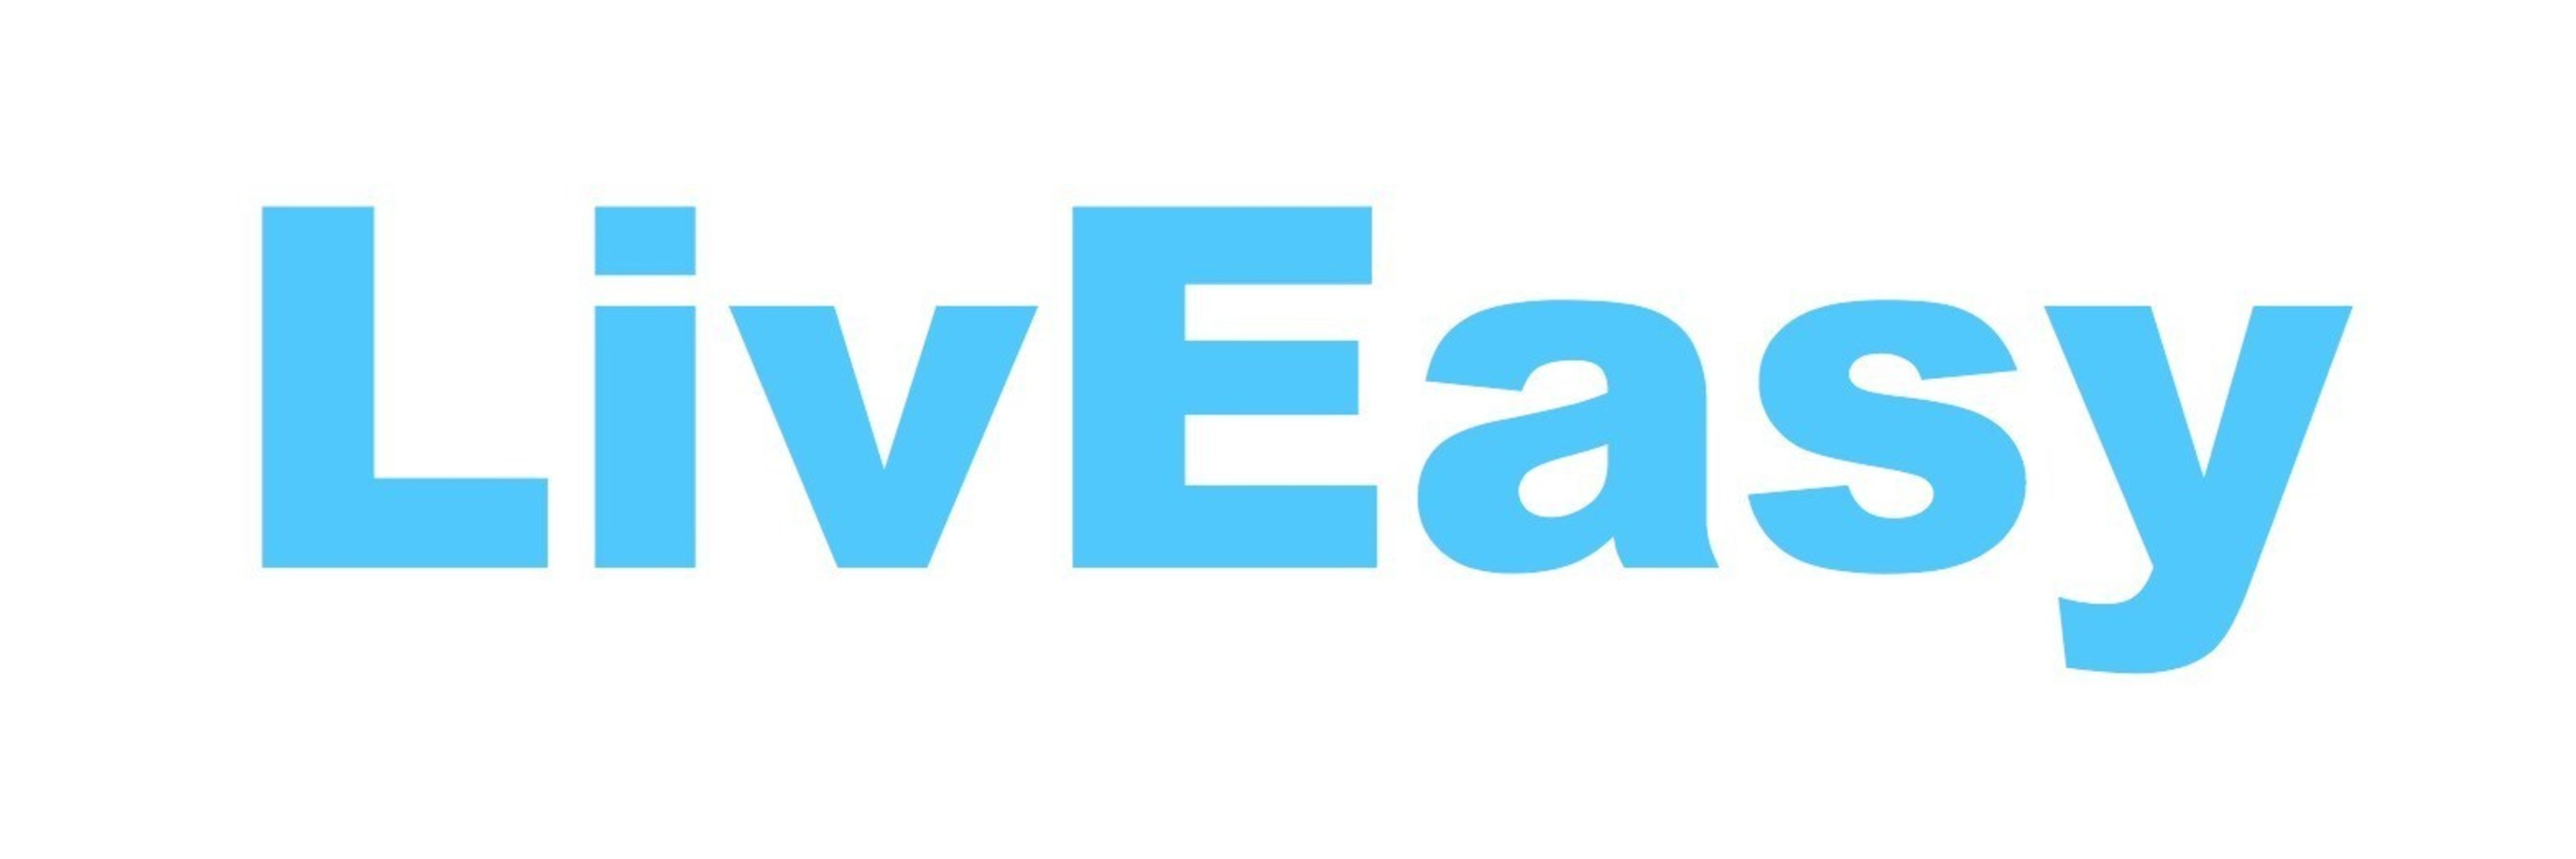 LivEasy, the Small Business Marketing App, Targets Local Consumers With ...